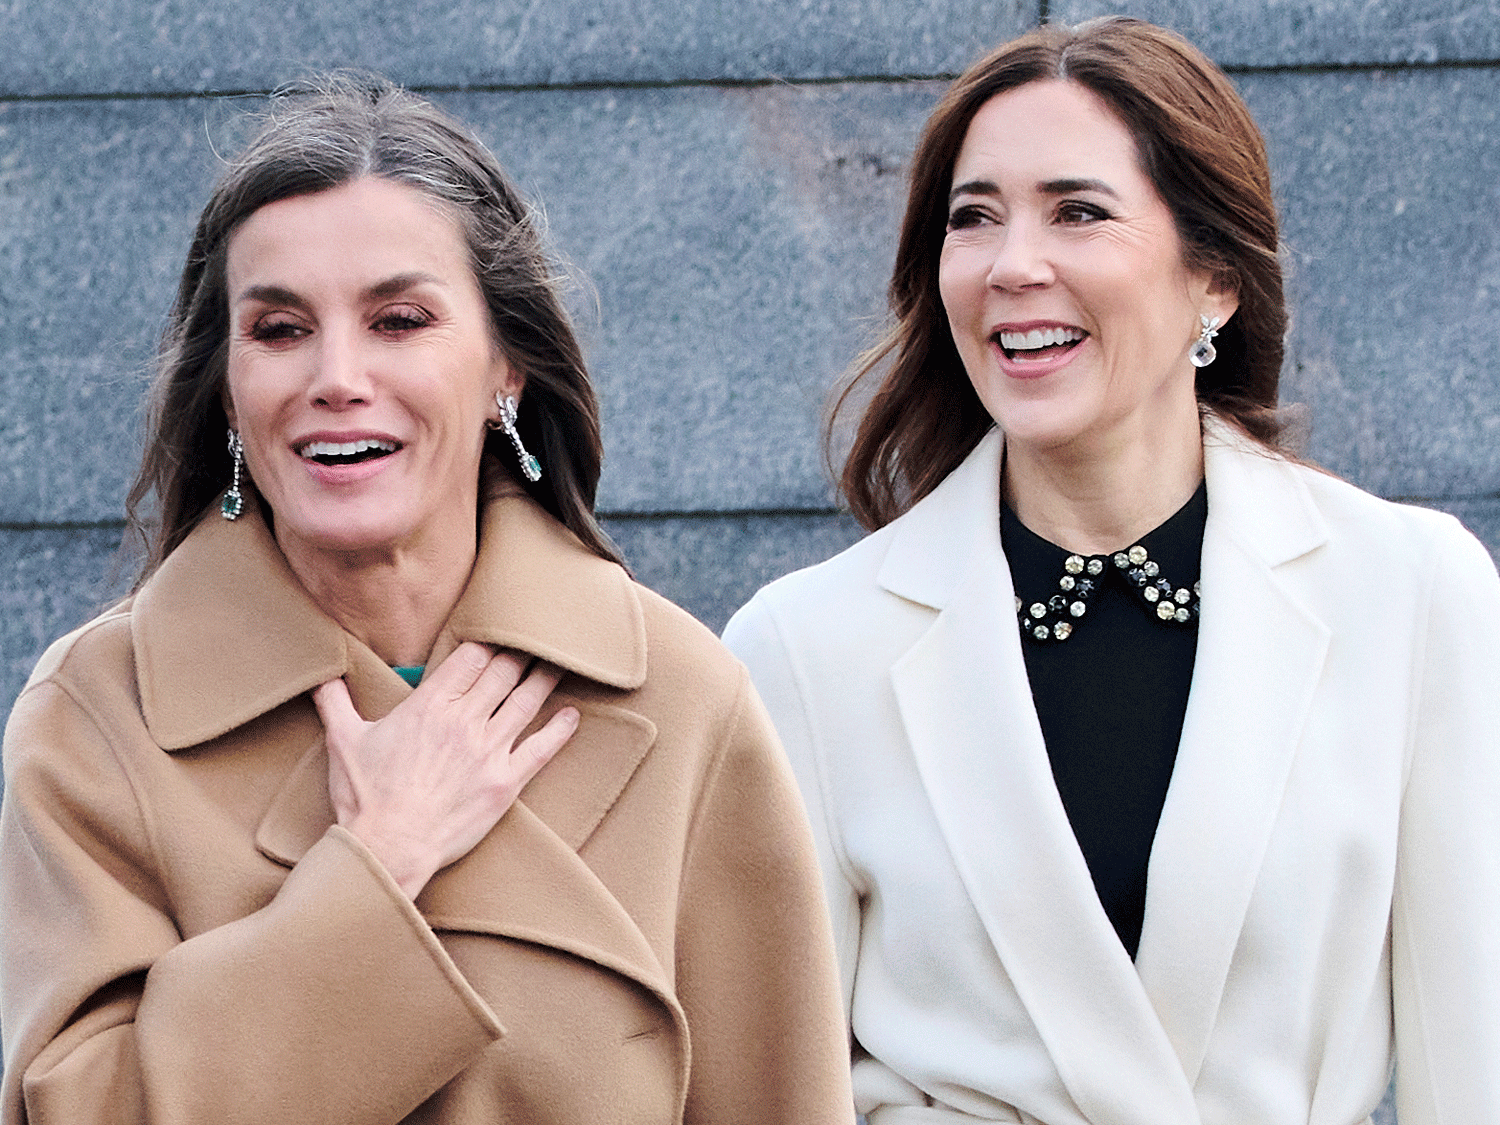 This Is Officially the Coat Trend of Choice for Royals